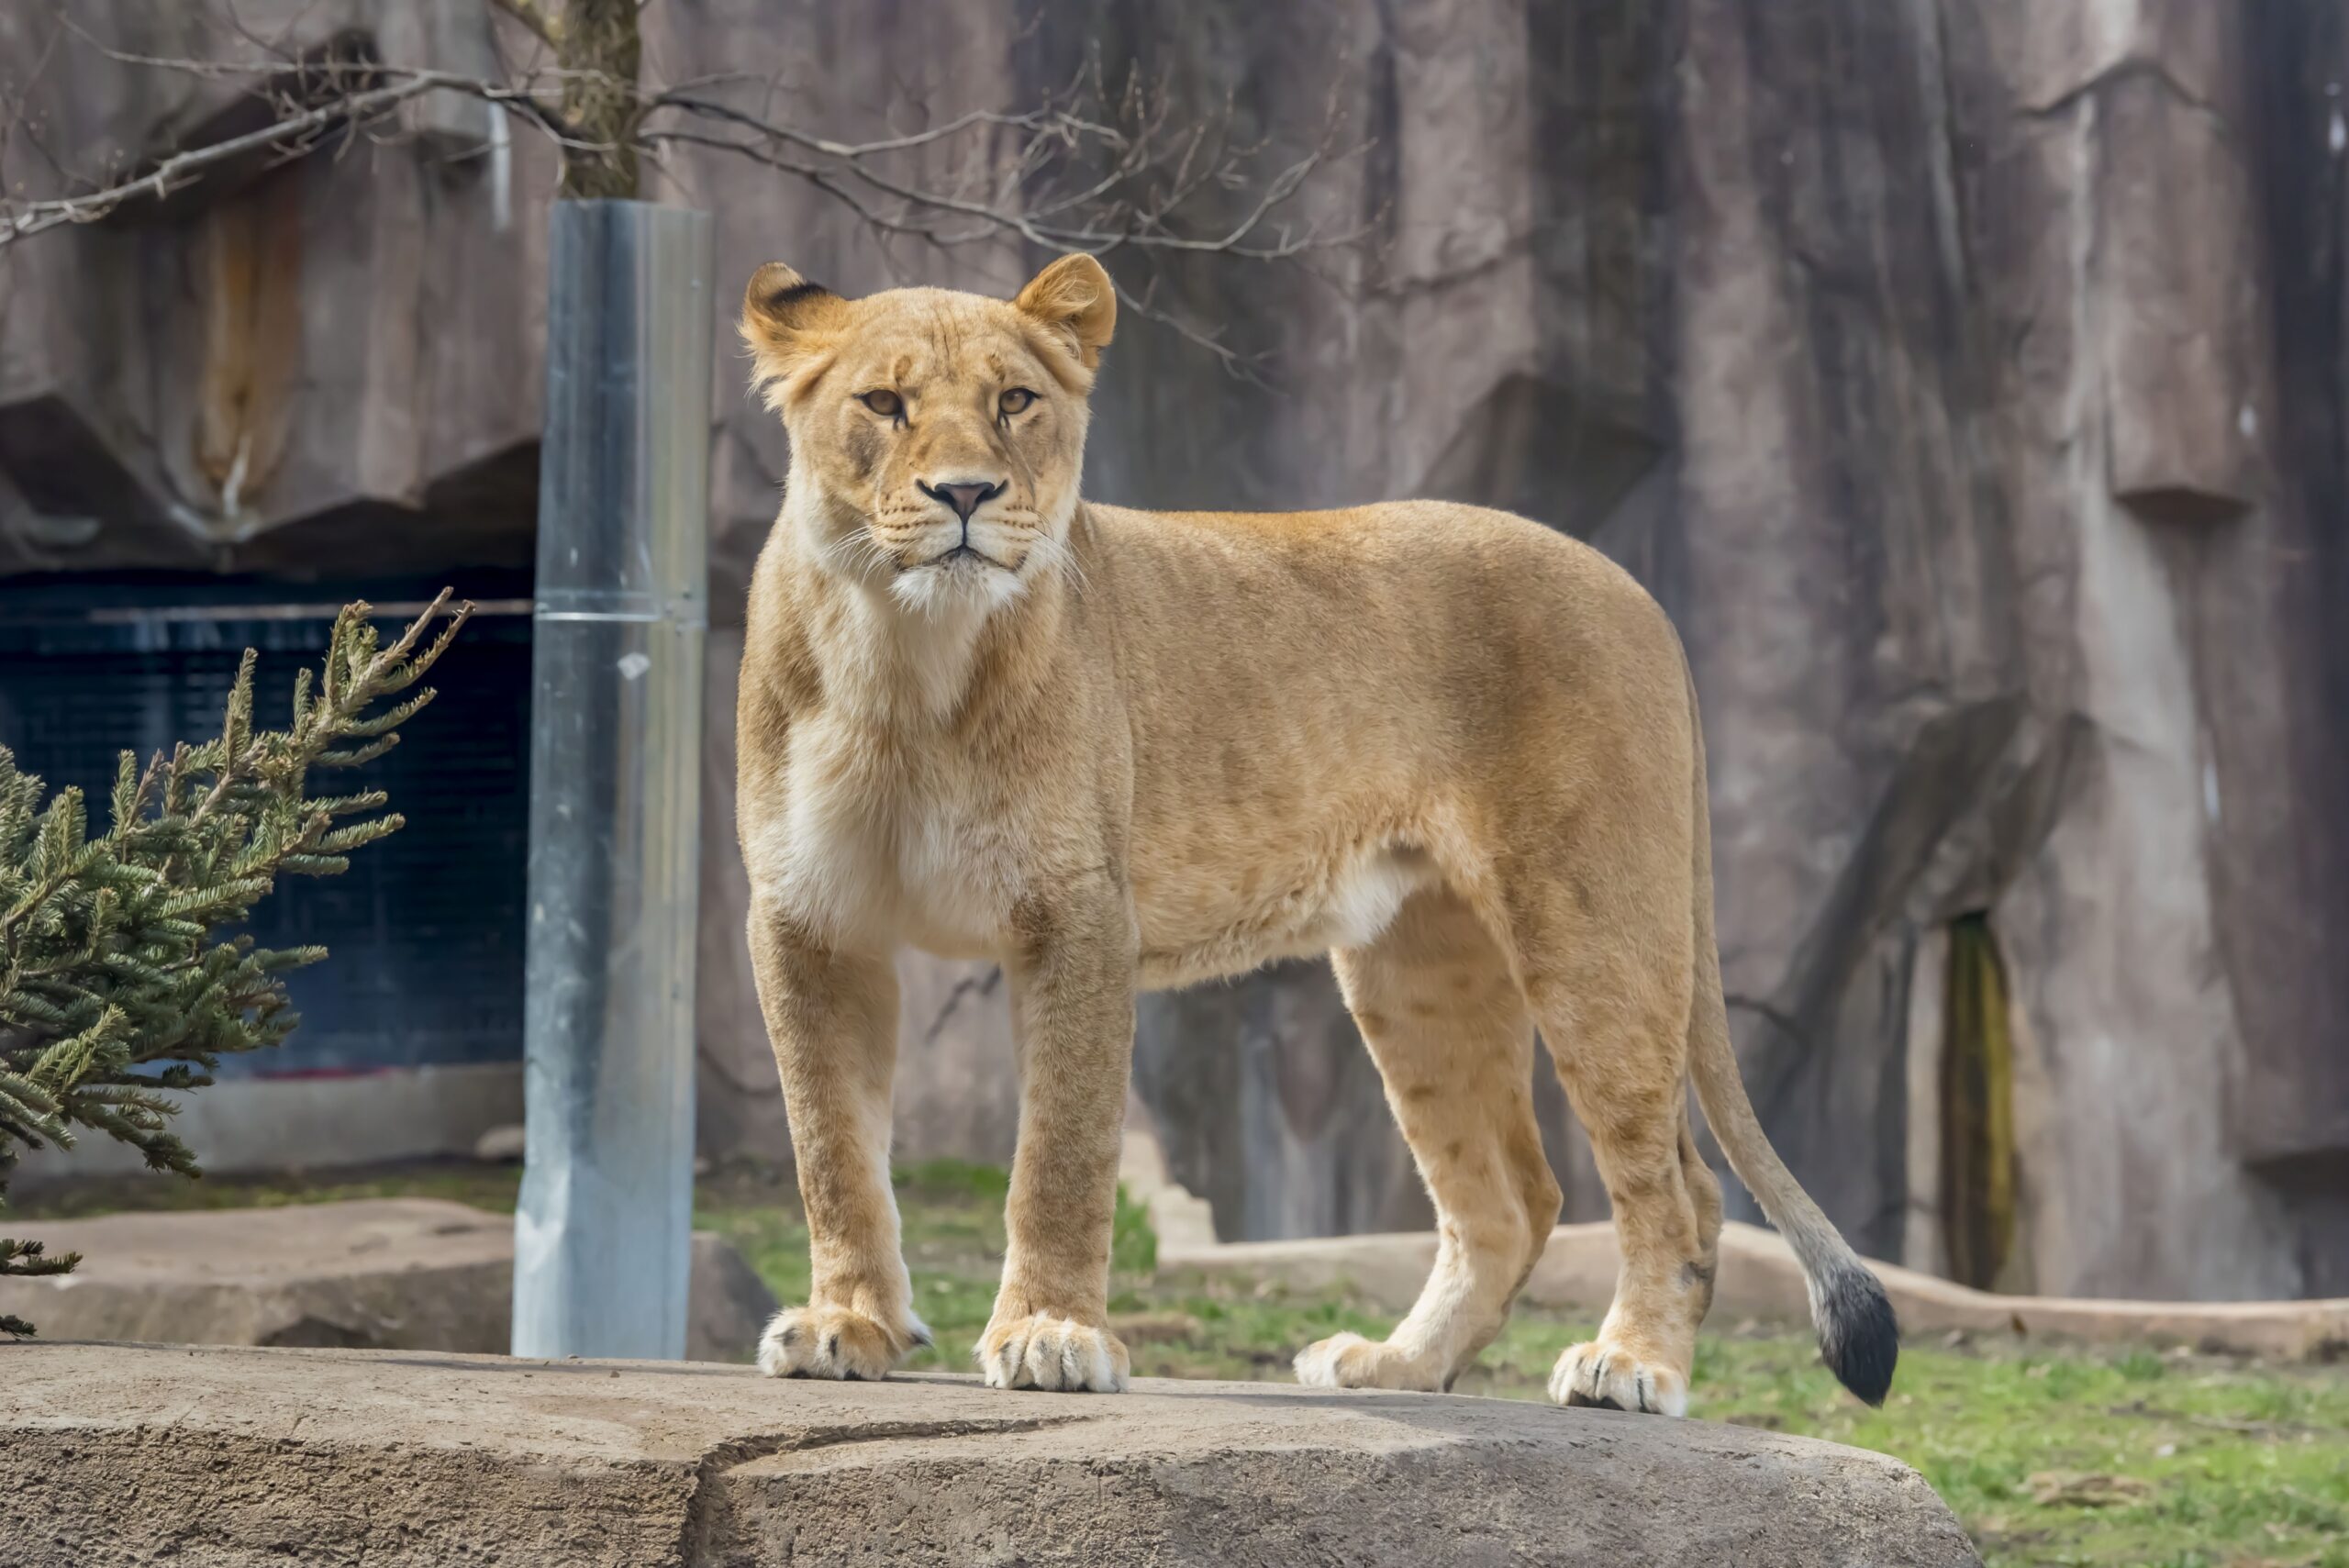 Eloise the lioness perched on a rock